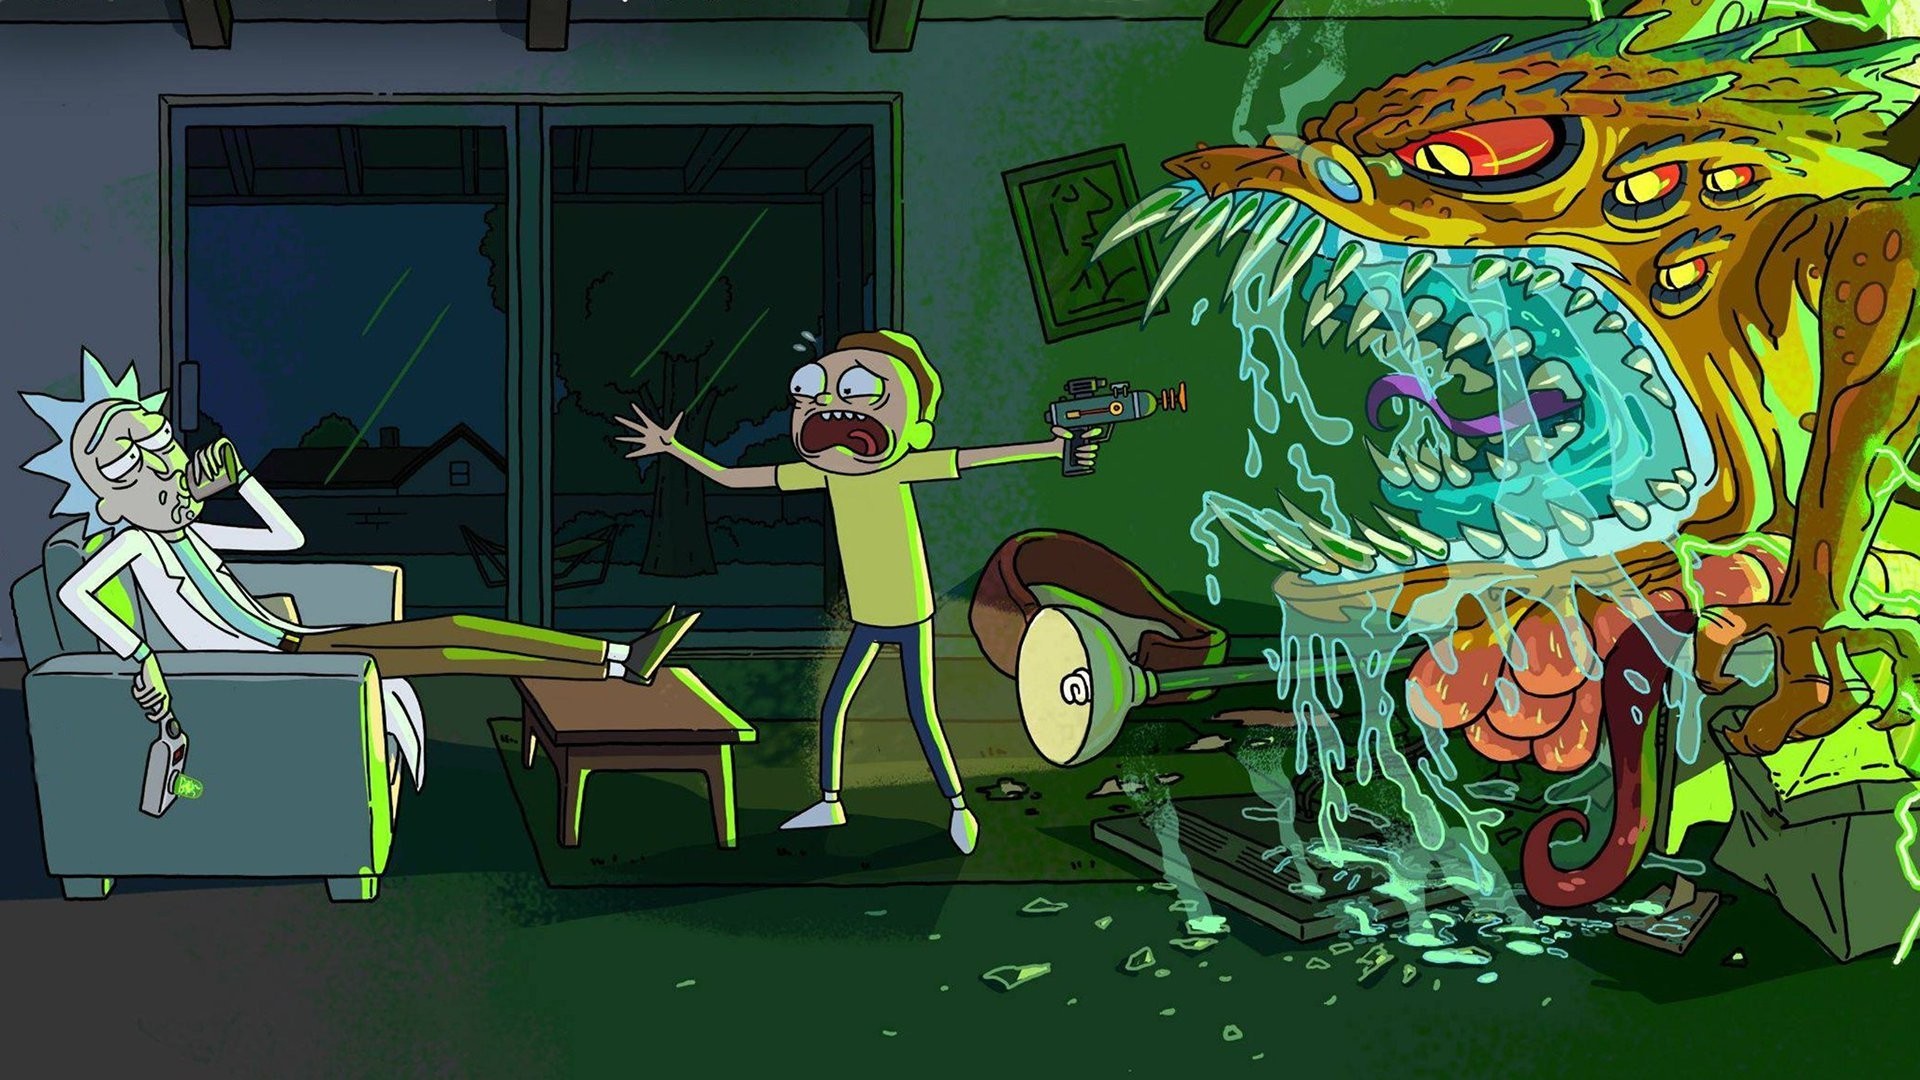 Rick n Morty Wallpaper For Desktop with high-resolution 1920x1080 pixel. You can use this poster wallpaper for your Desktop Computers, Mac Screensavers, Windows Backgrounds, iPhone Wallpapers, Tablet or Android Lock screen and another Mobile device